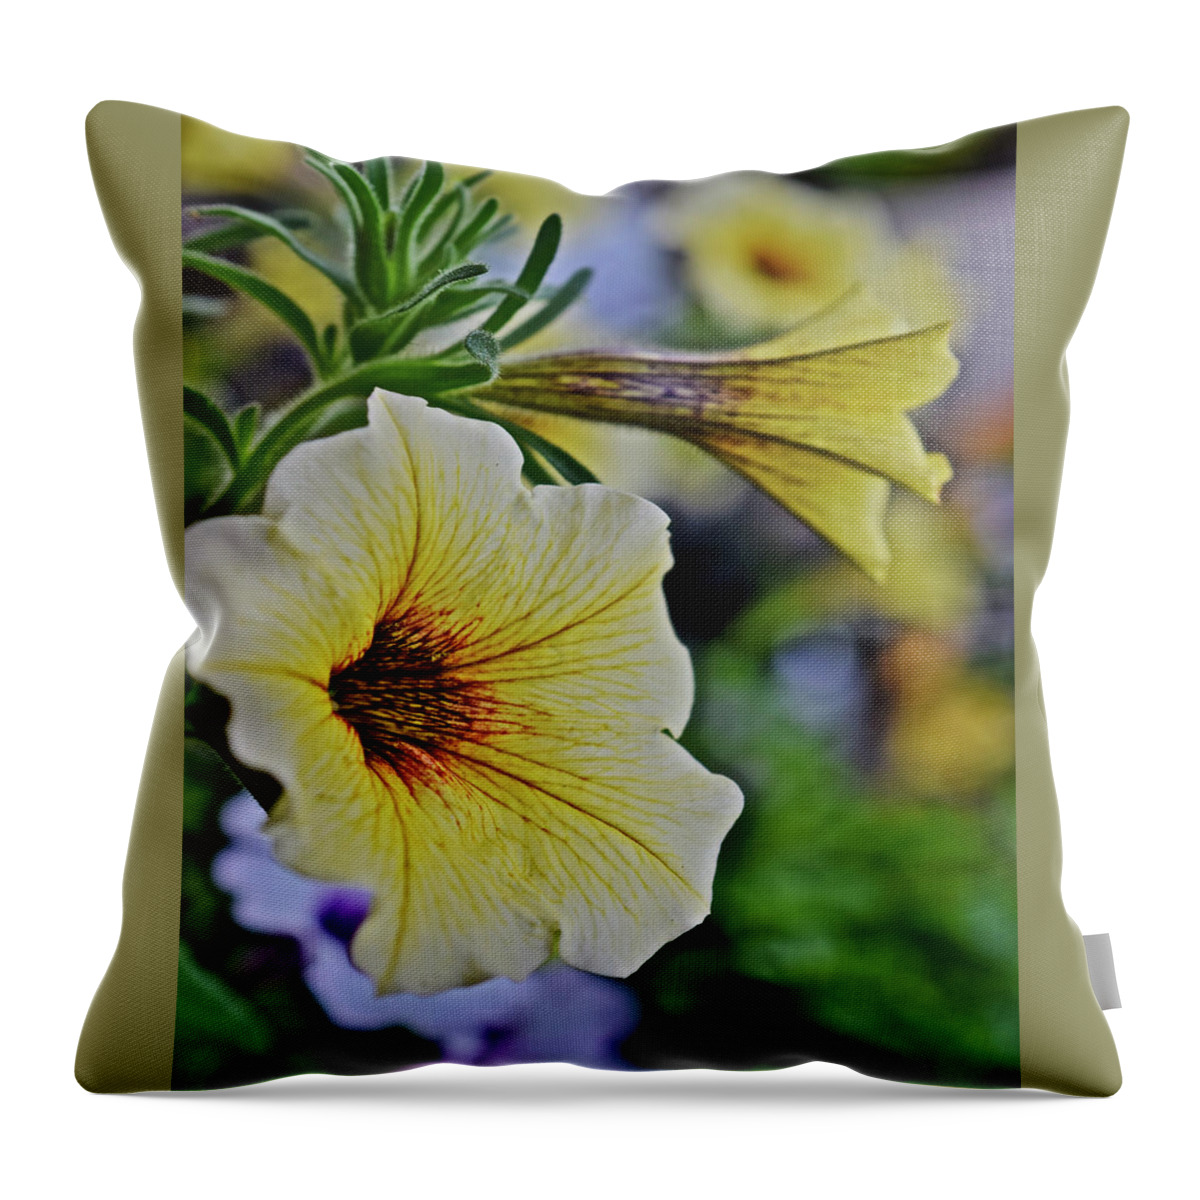 Flowers Throw Pillow featuring the photograph 2021 French Vanilla Petchoa Vertical by Janis Senungetuk